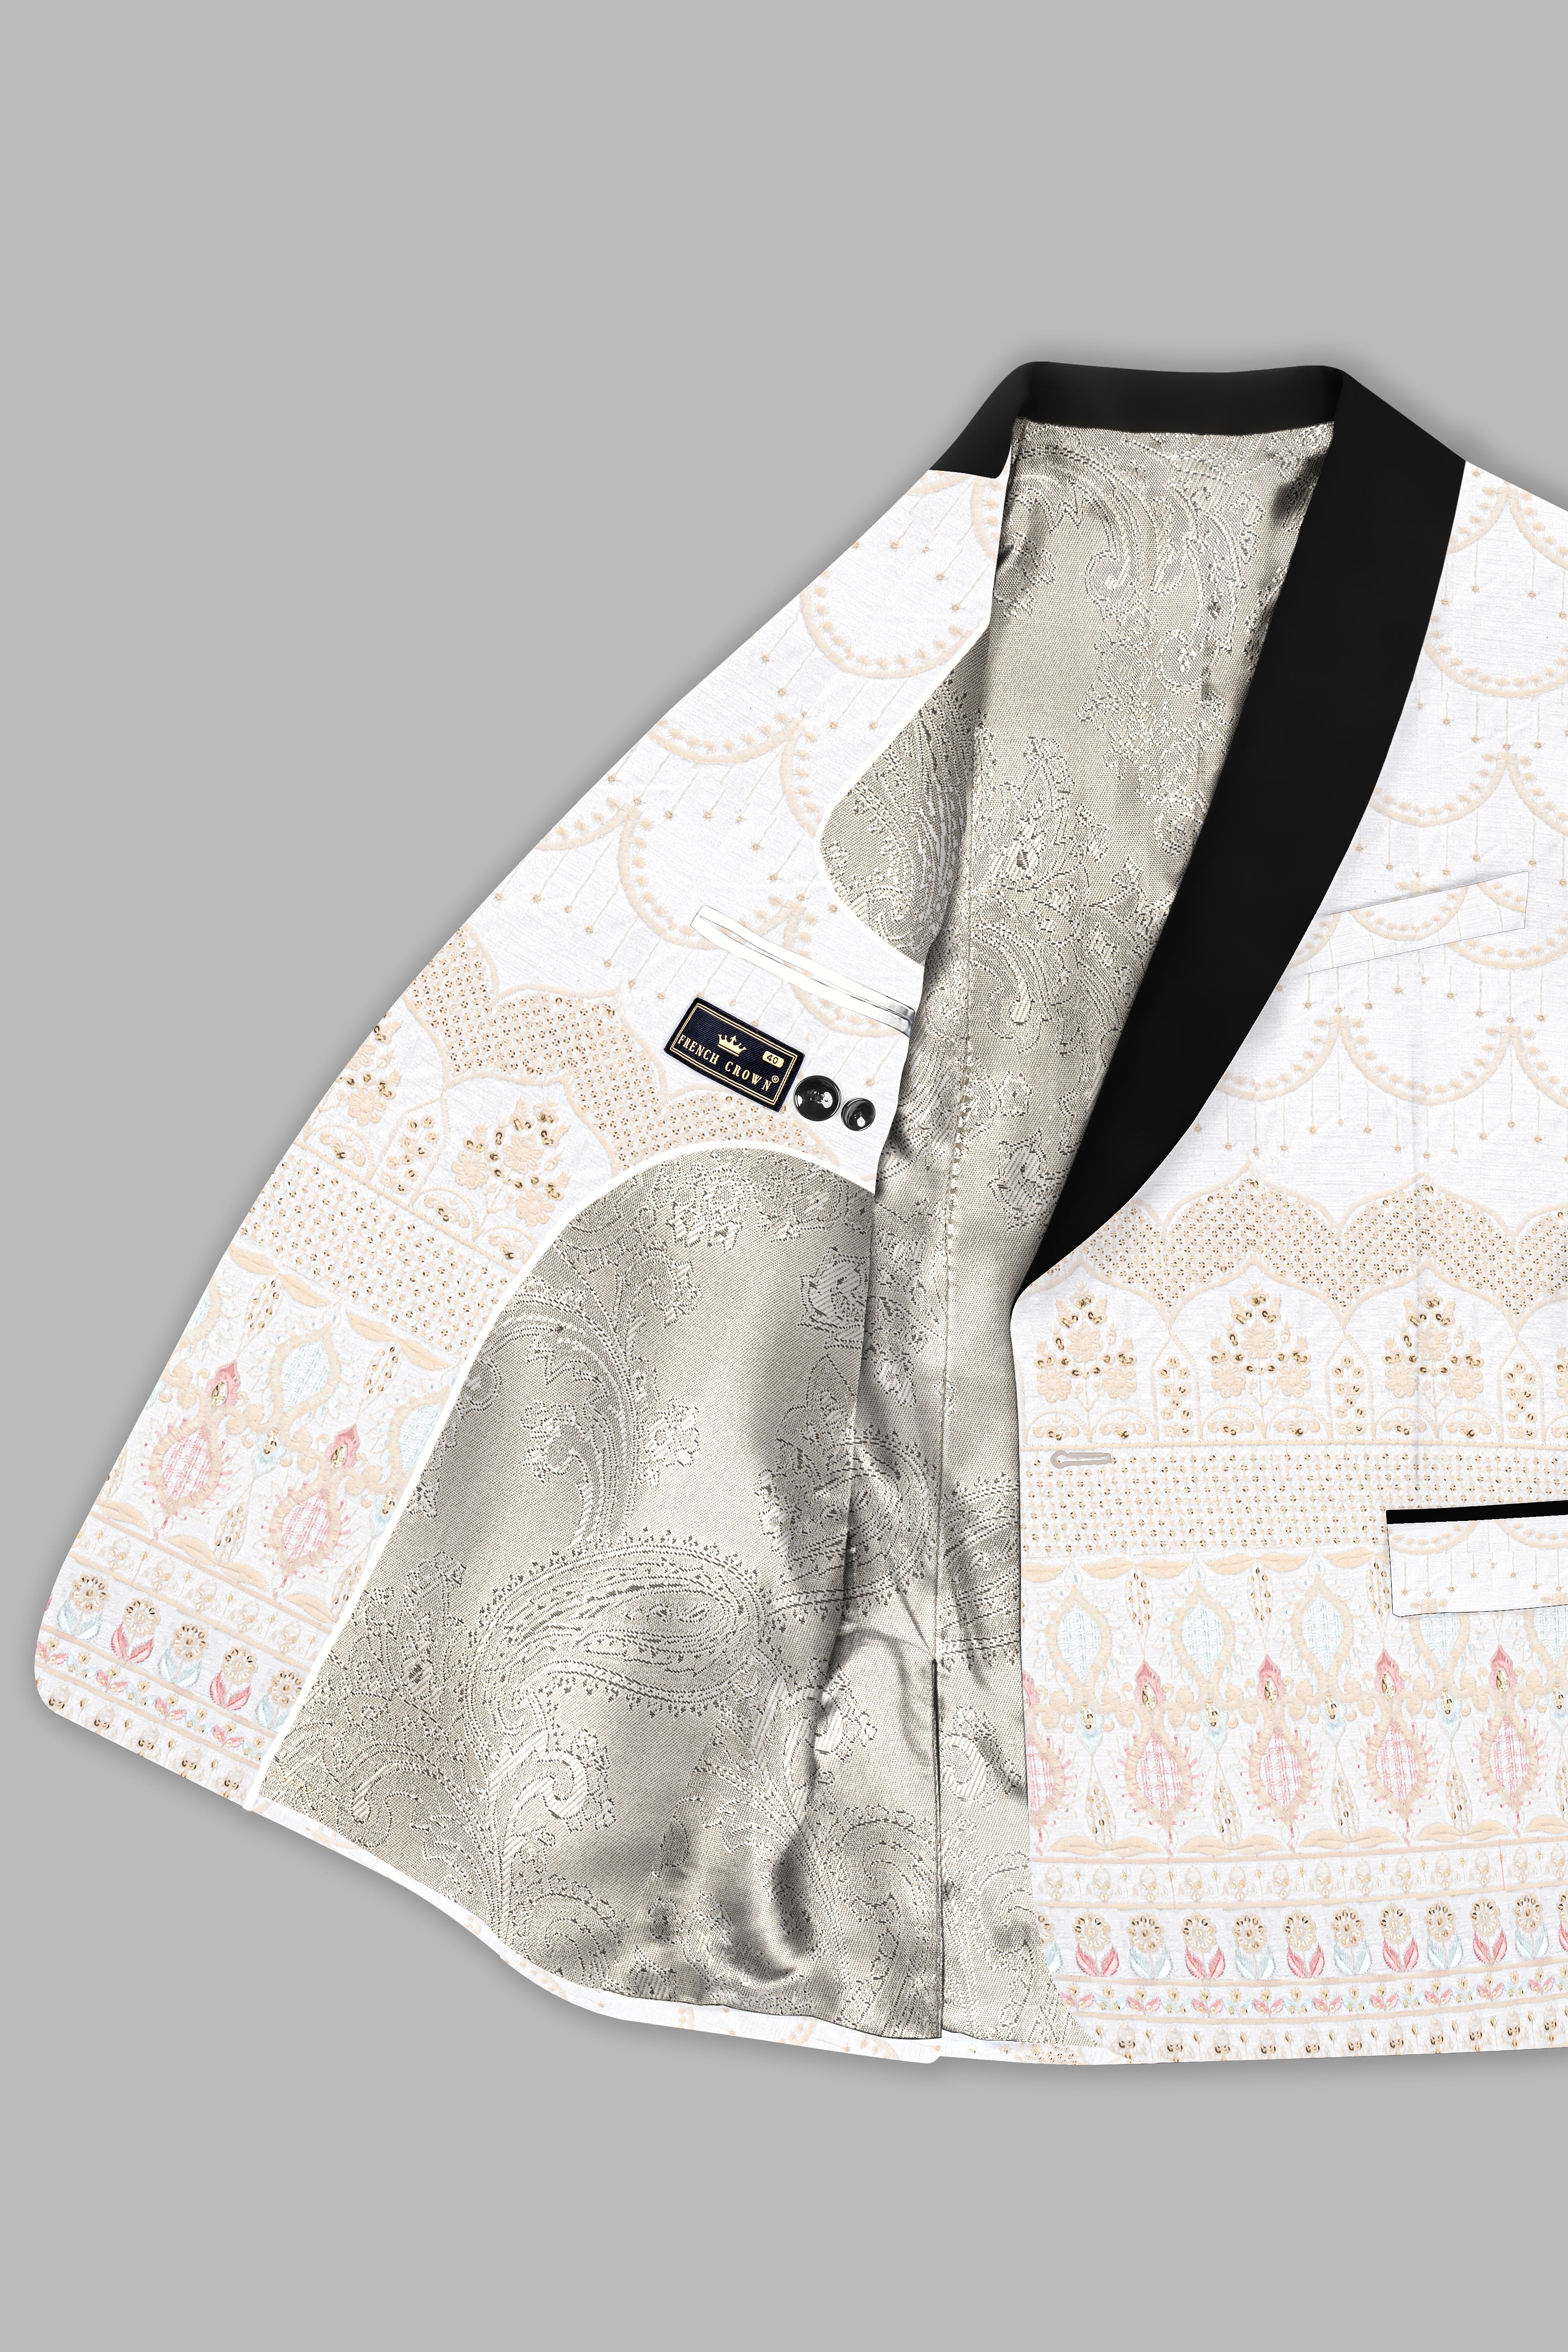 Sand Cream Sequin and Thread Embroidered Tuxedo Blazer BL3741-BKL-36, BL3741-BKL-38, BL3741-BKL-40, BL3741-BKL-42, BL3741-BKL-44, BL3741-BKL-46, BL3741-BKL-48, BL3741-BKL-50, BL3741-BKL-52, BL3741-BKL-54, BL3741-BKL-56, BL3741-BKL-58, BL3741-BKL-60